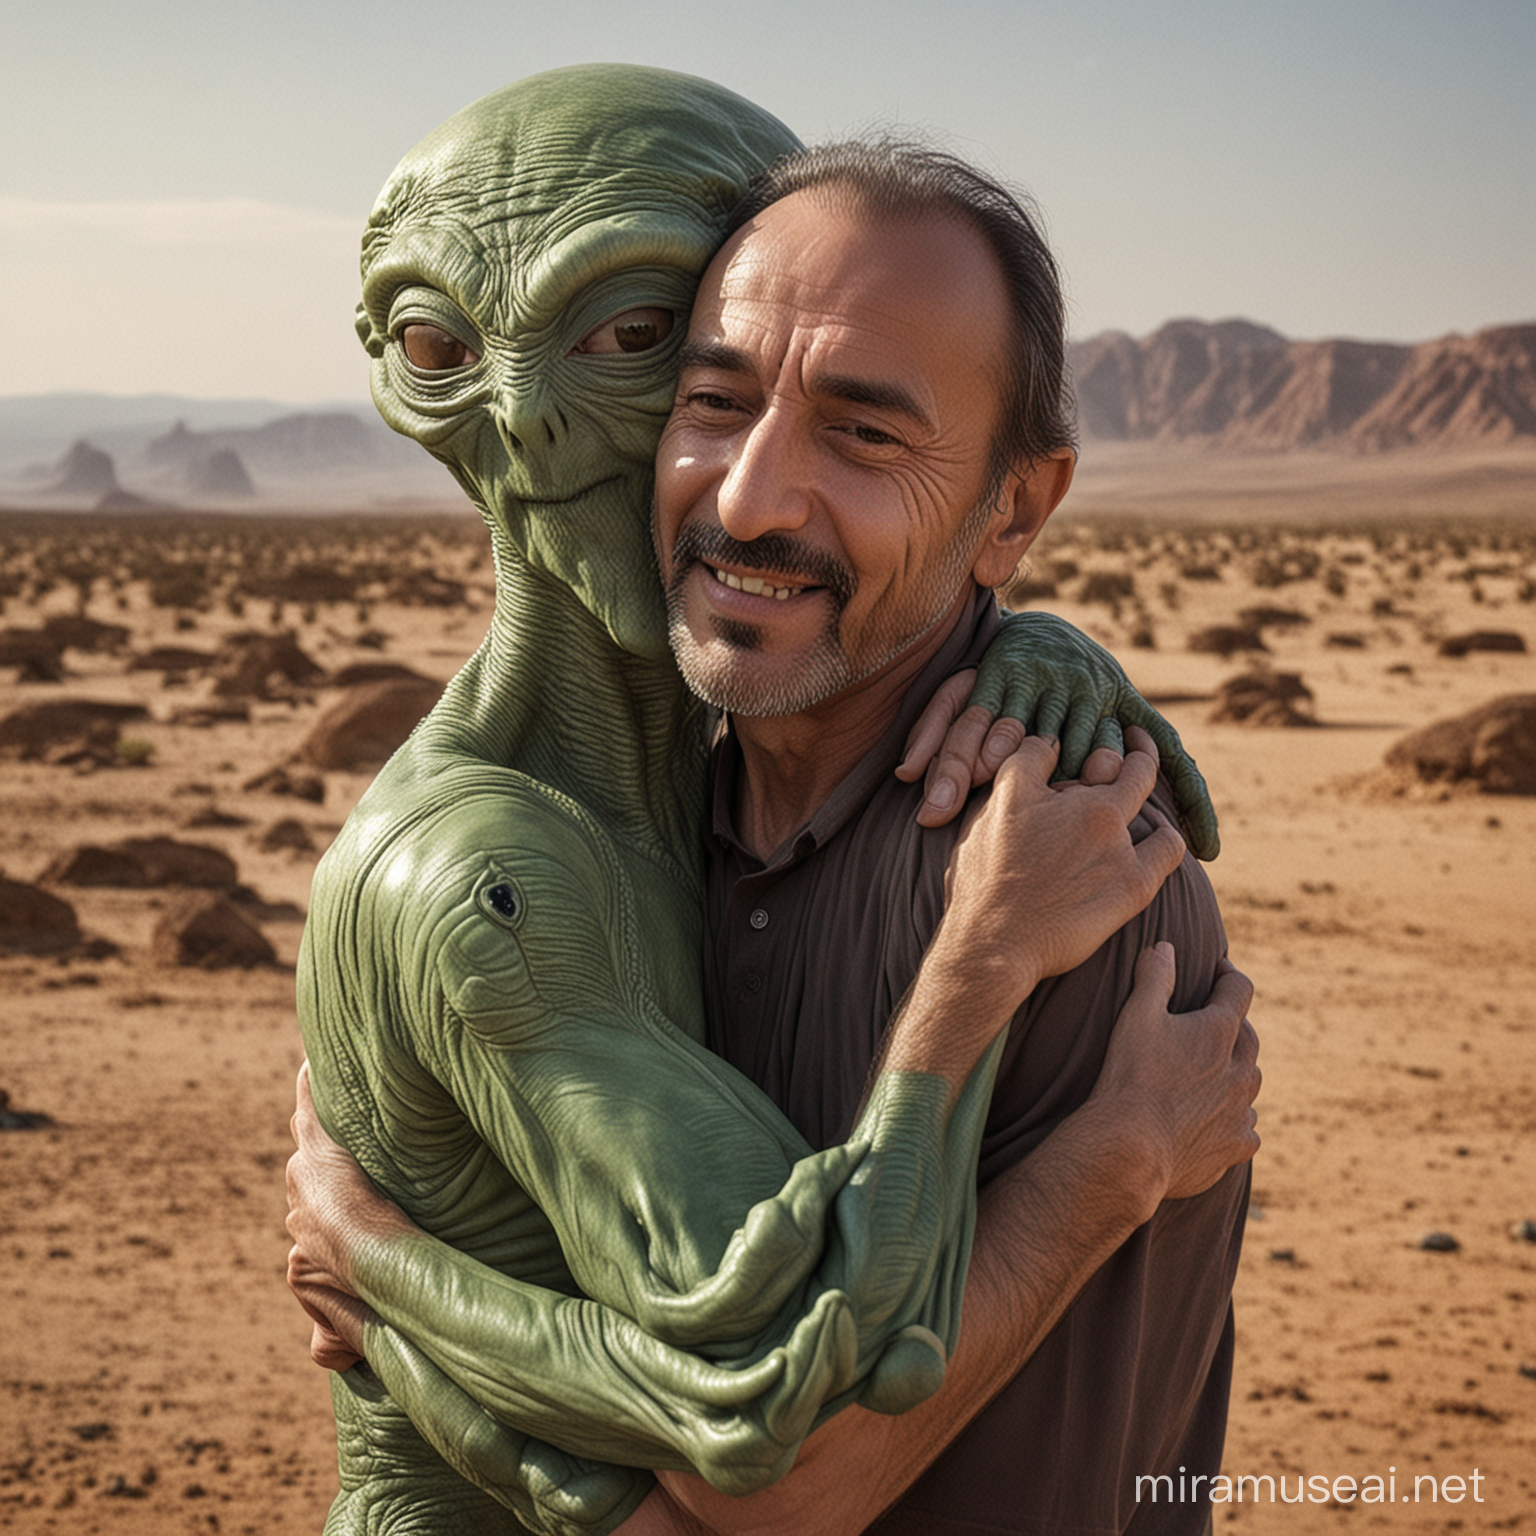 Celebrity Yusuf Gney Embracing Extraterrestrial Being